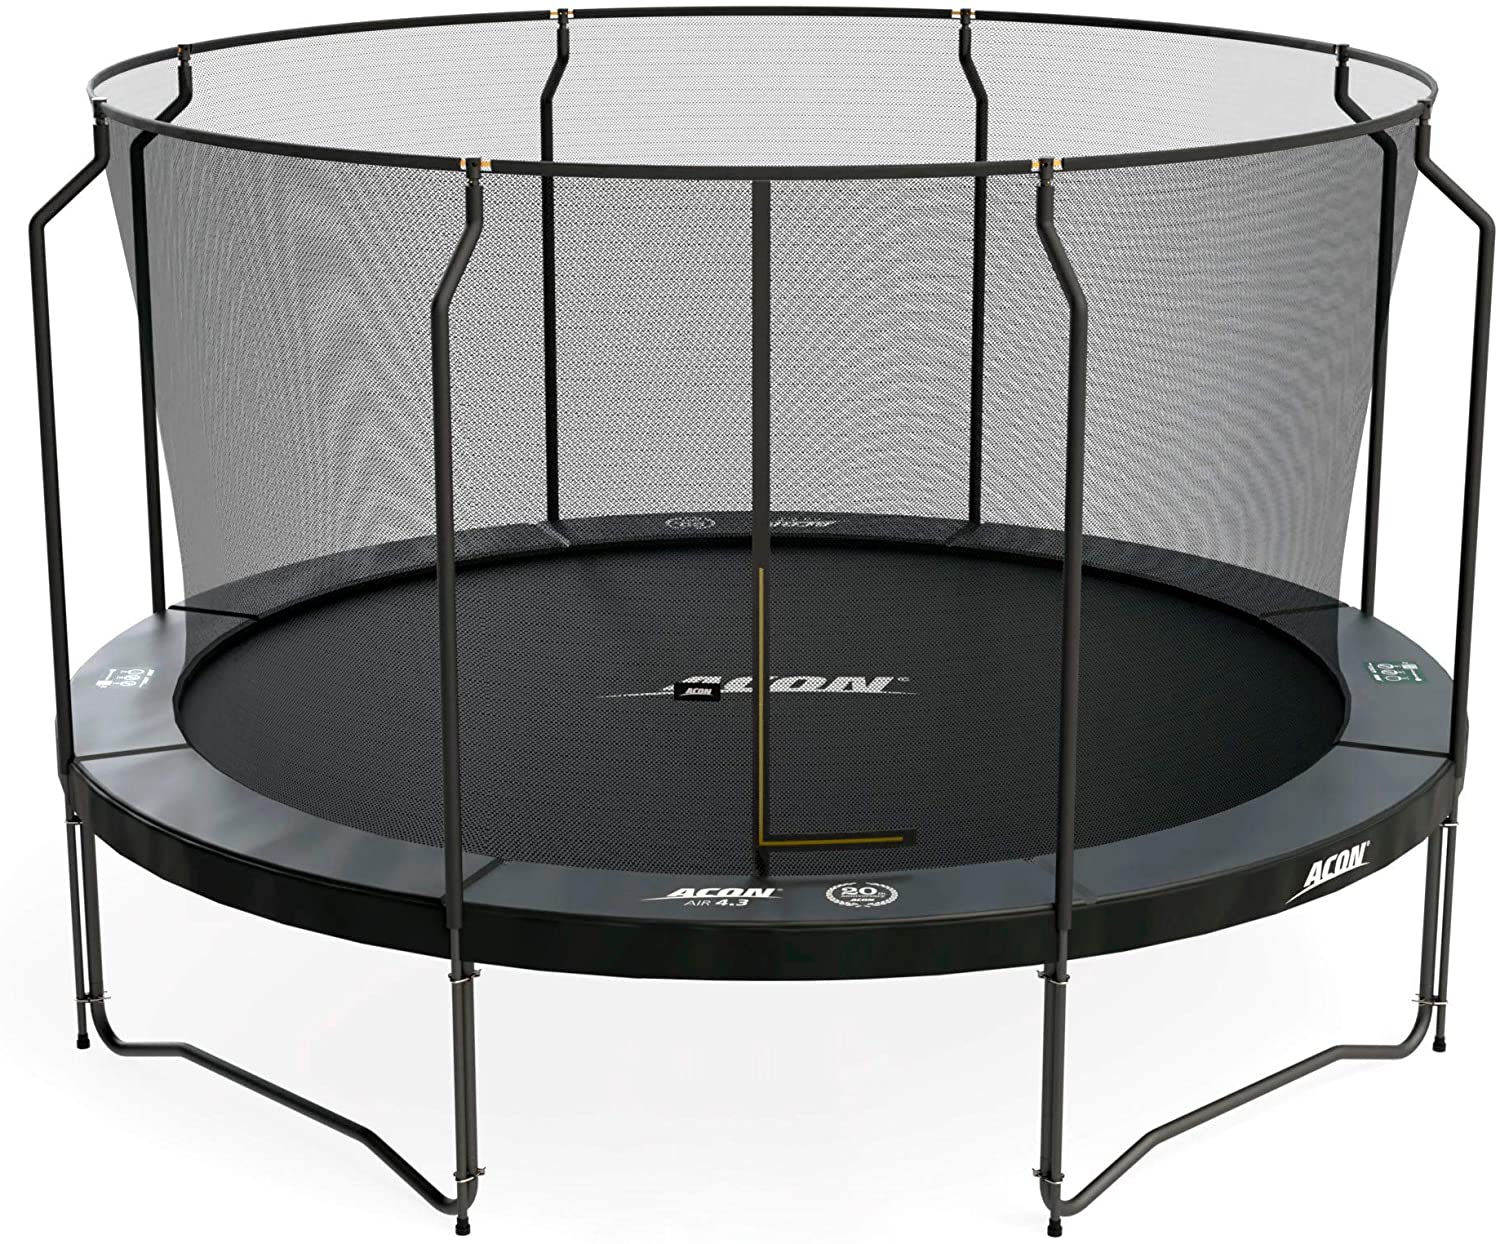 Best Round Trampolines That You Can Buy [2022 Reviews]